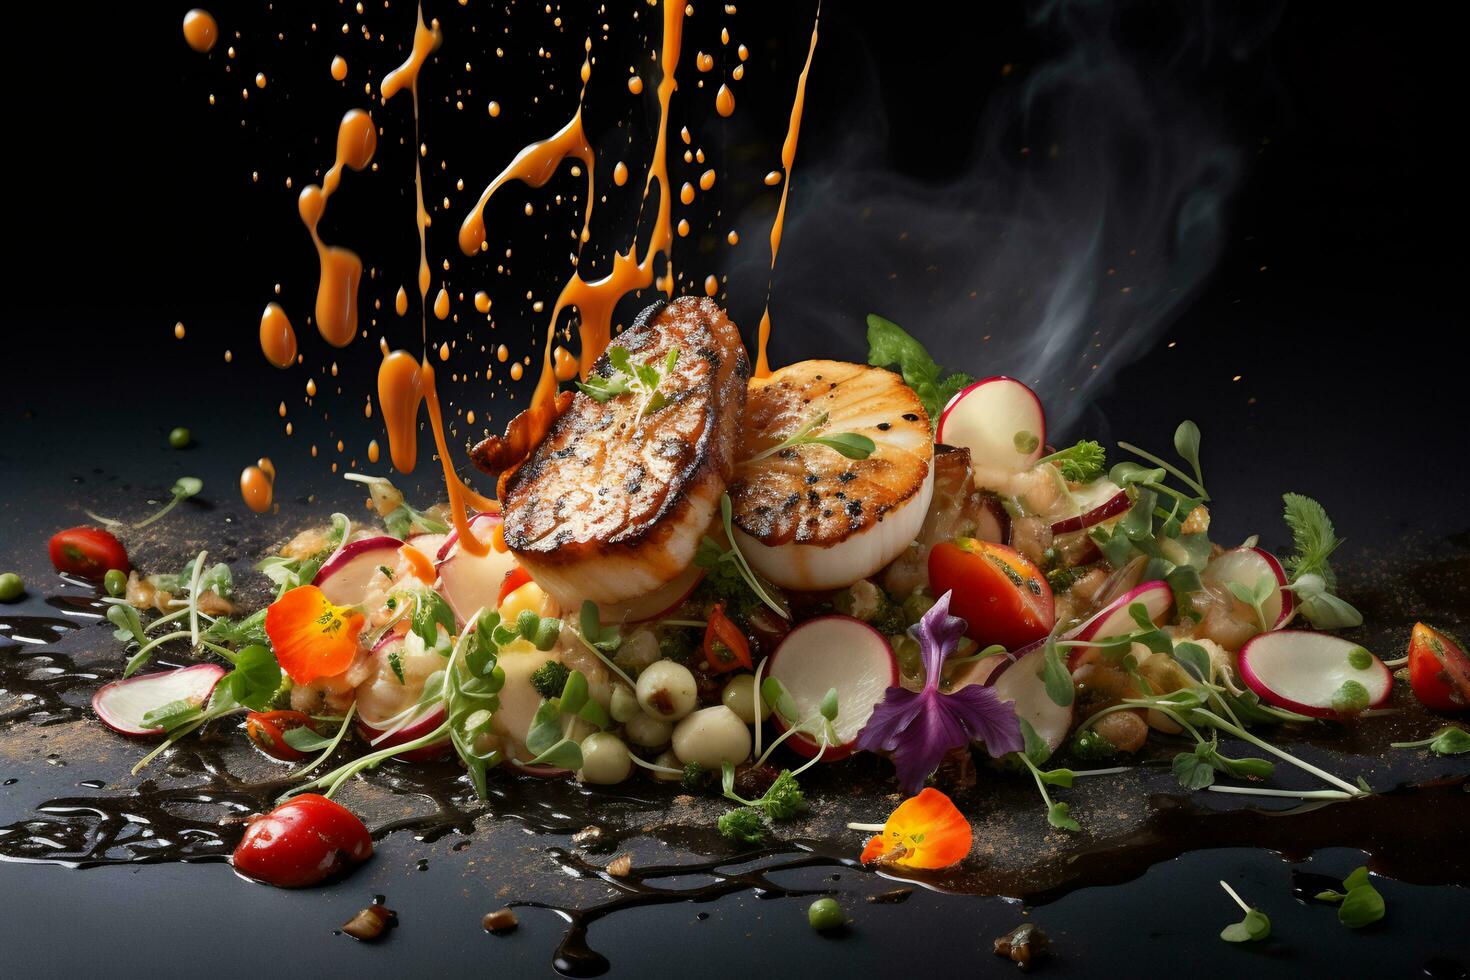 Mouthwatering images of gourmet dishes photo